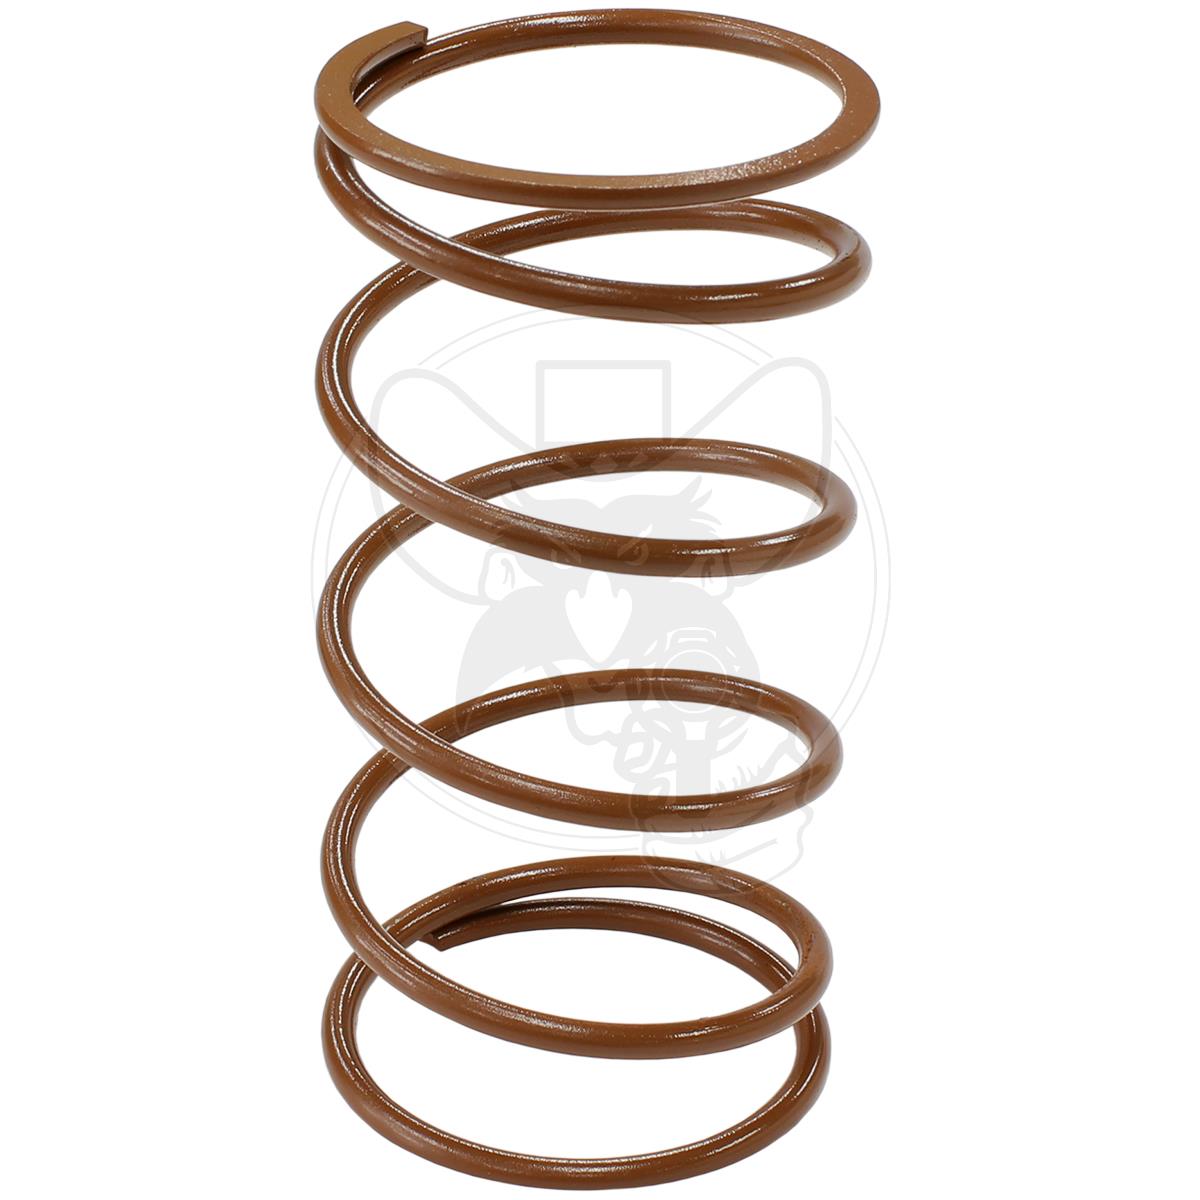 AEROFLOW WASTEGATE OUTER SPRING FROM 14.5 PSI (1 BAR) - BROWN